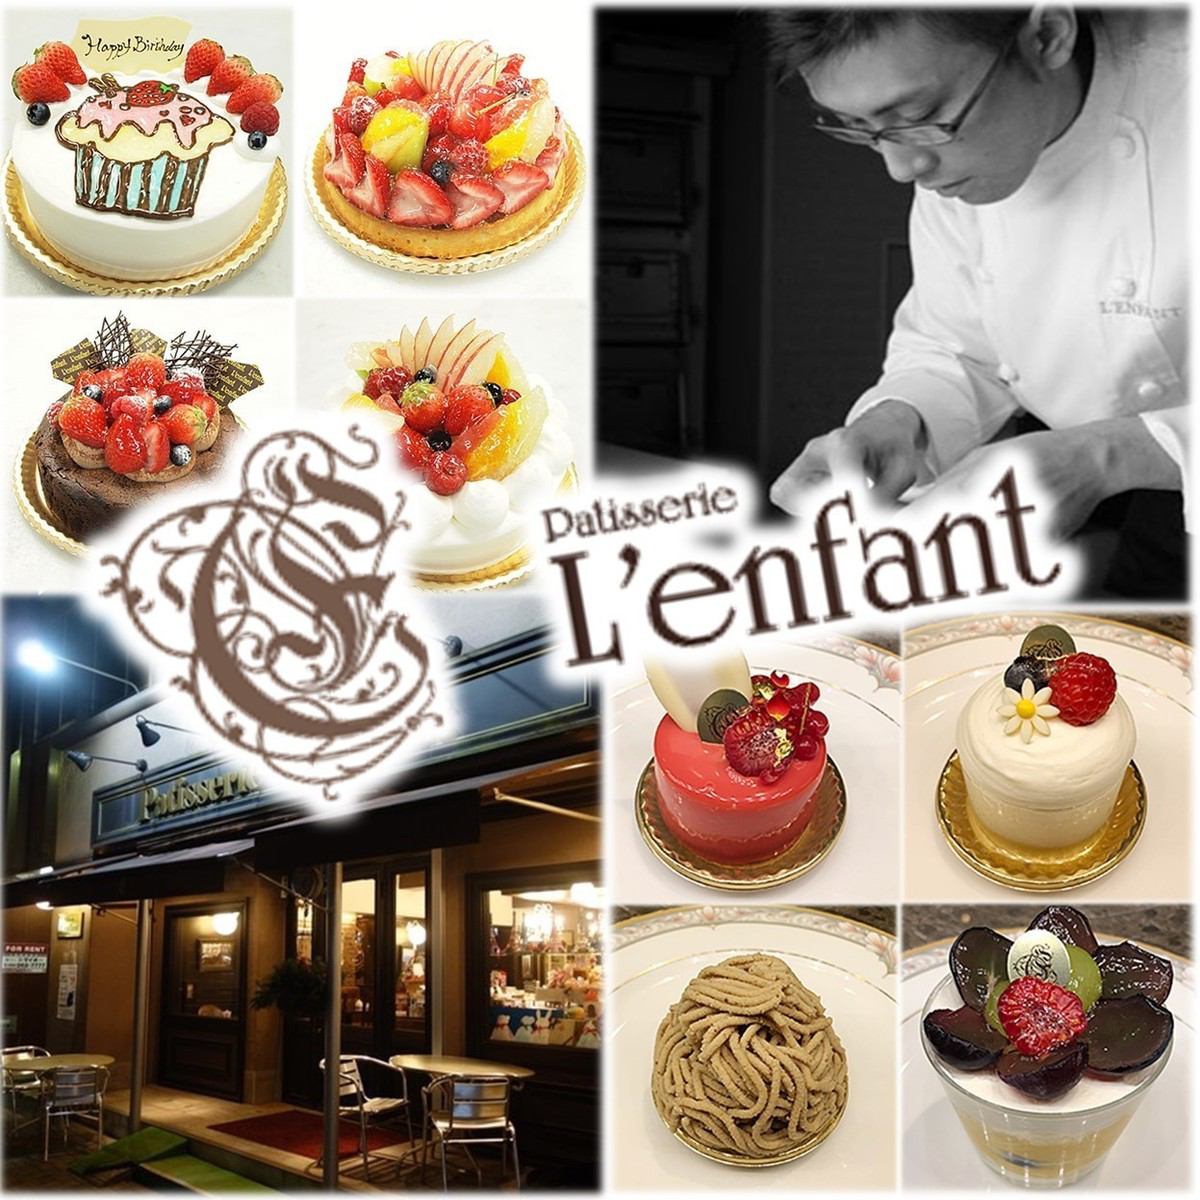 A shop broadcasted on TV ♪ A cake shop handled by a top-notch patissier!